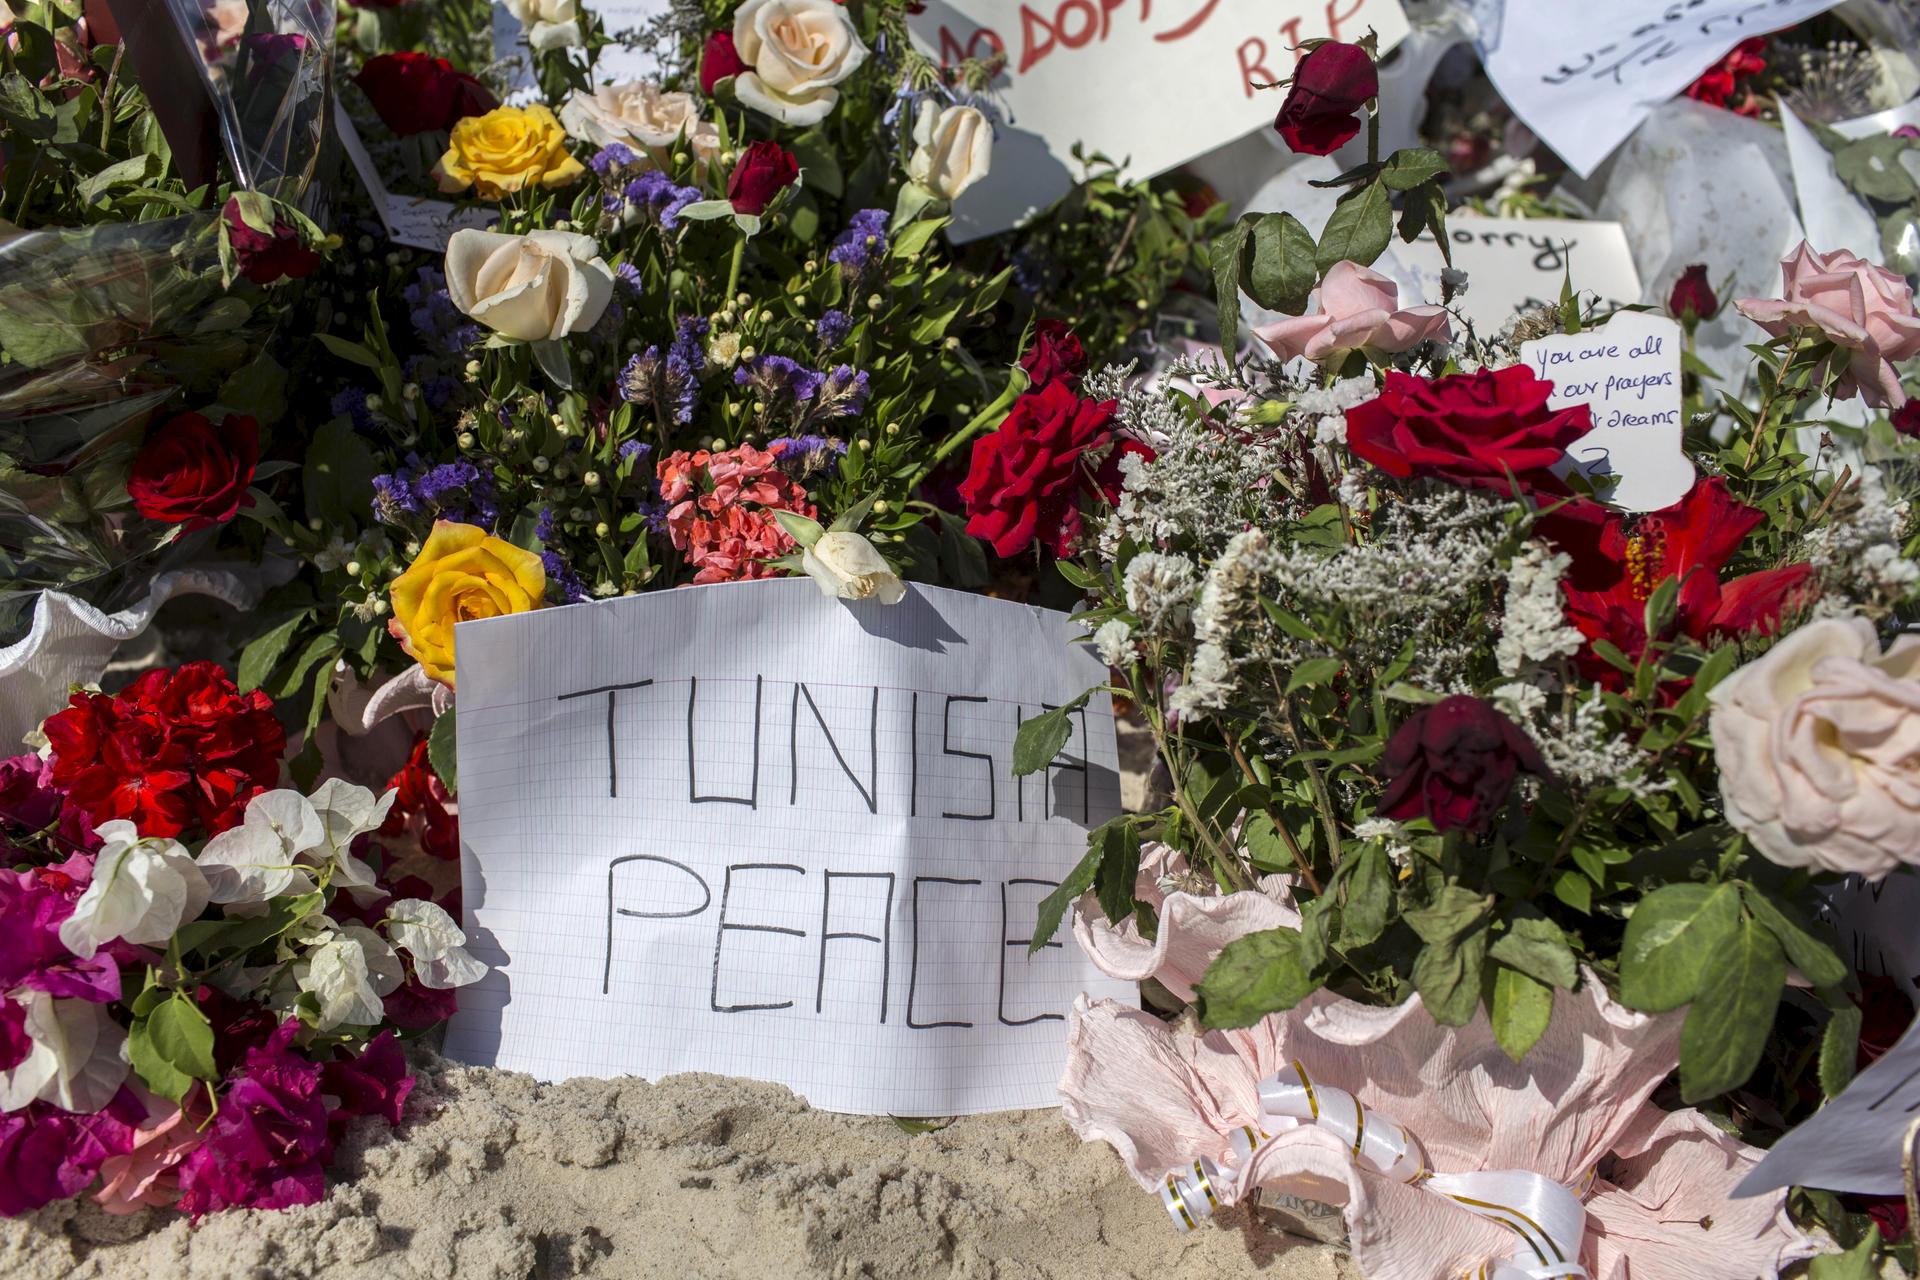 Messages and flowers are placed at the beach of the Imperial Marhaba resort, which was attacked by a gunman in Sousse, Tunisia, June 29, 2015. The gunman disguised as a tourist opened fire at the Tunisian hotel killing 39 people including Britons, Germans